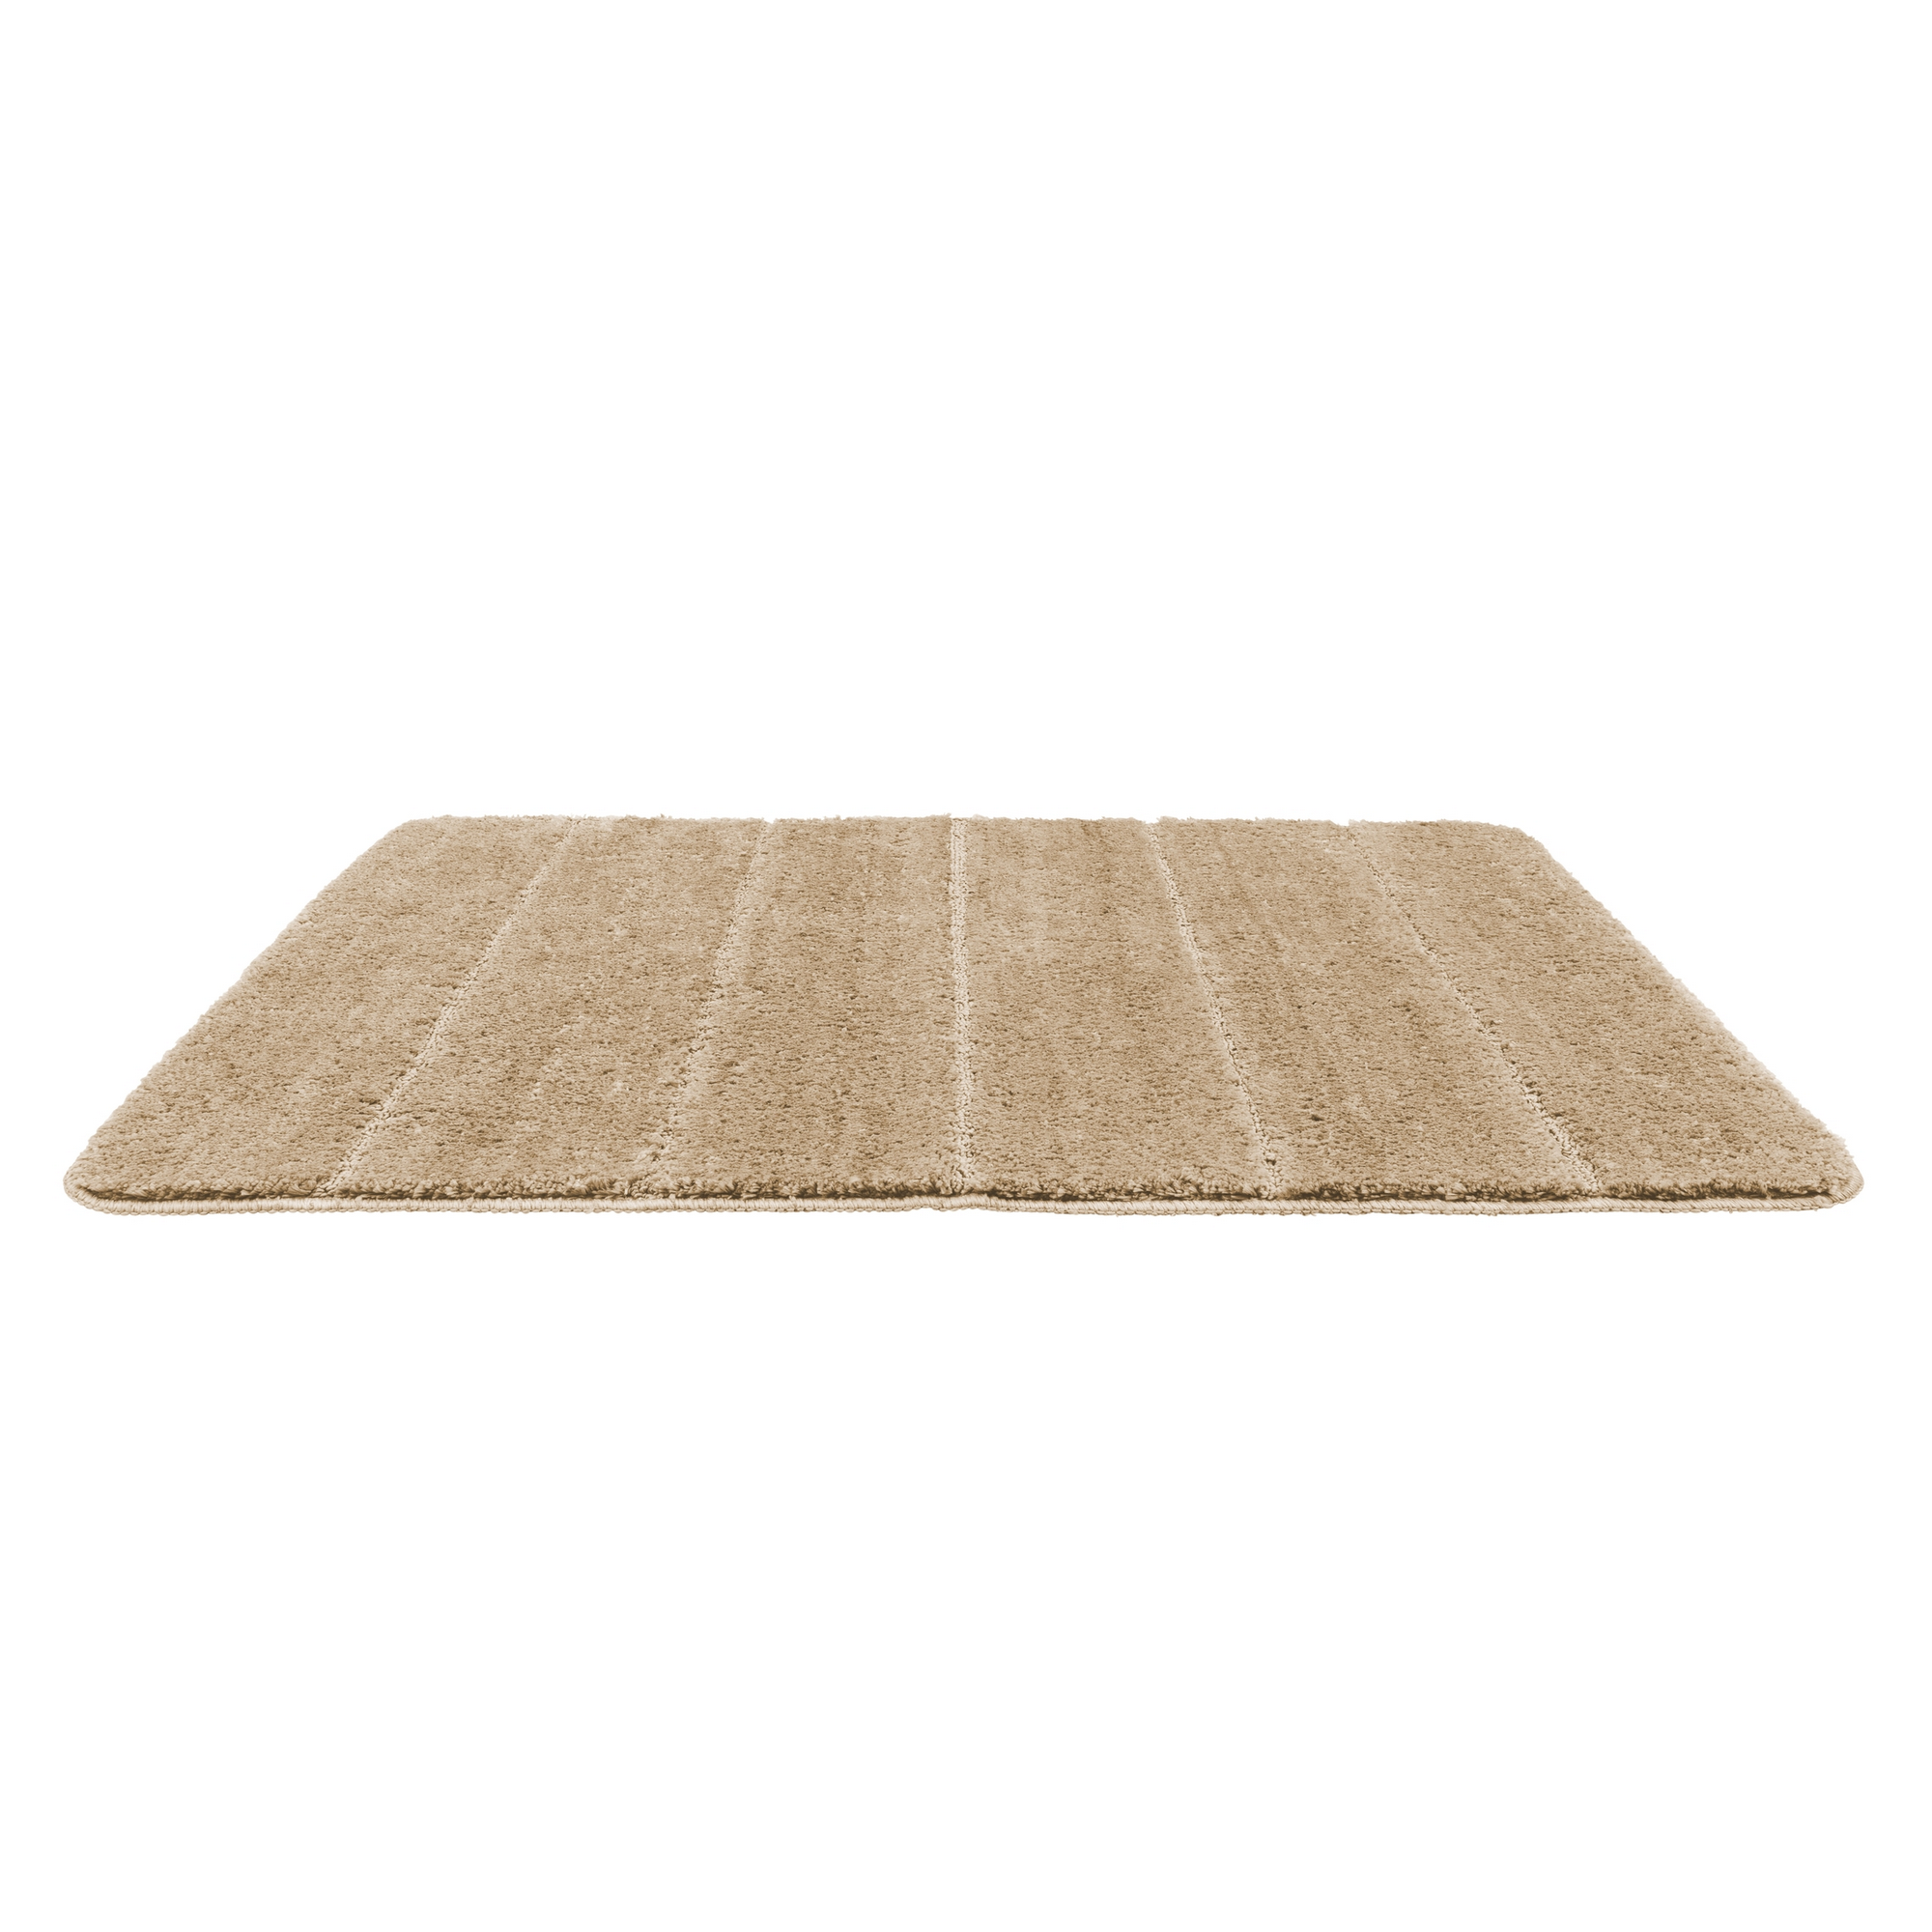 Badteppich 'Steps Sand', 60 x 90 cm, Mikrofaser, beige + product picture